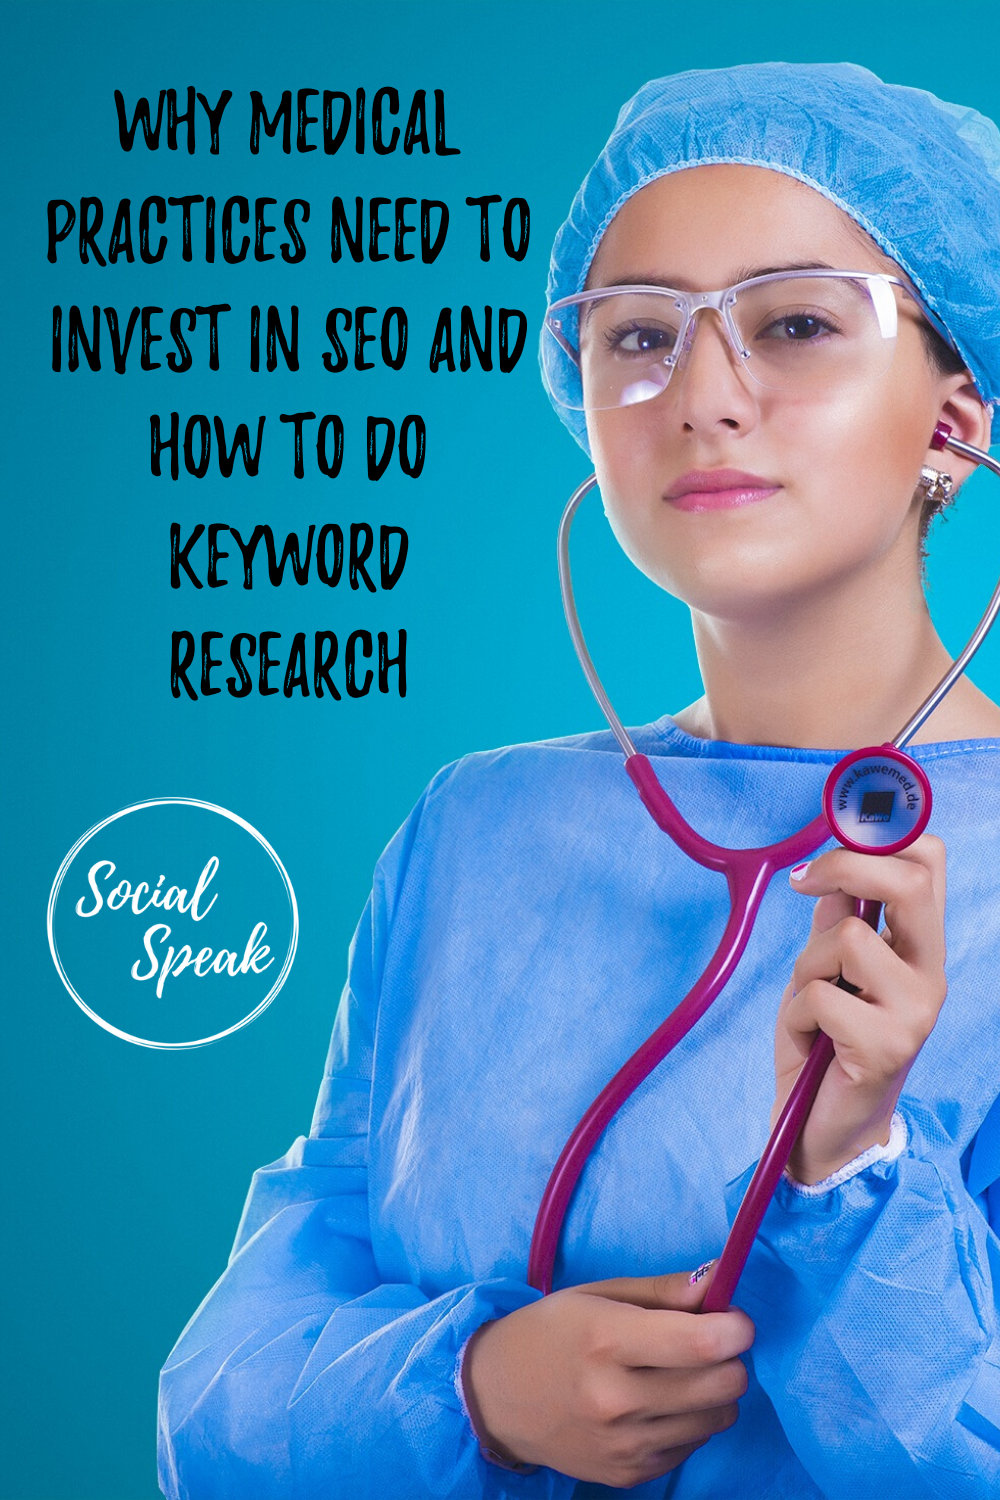 Why Medical Practices Need to Invest in SEO and How to do Keyword Research